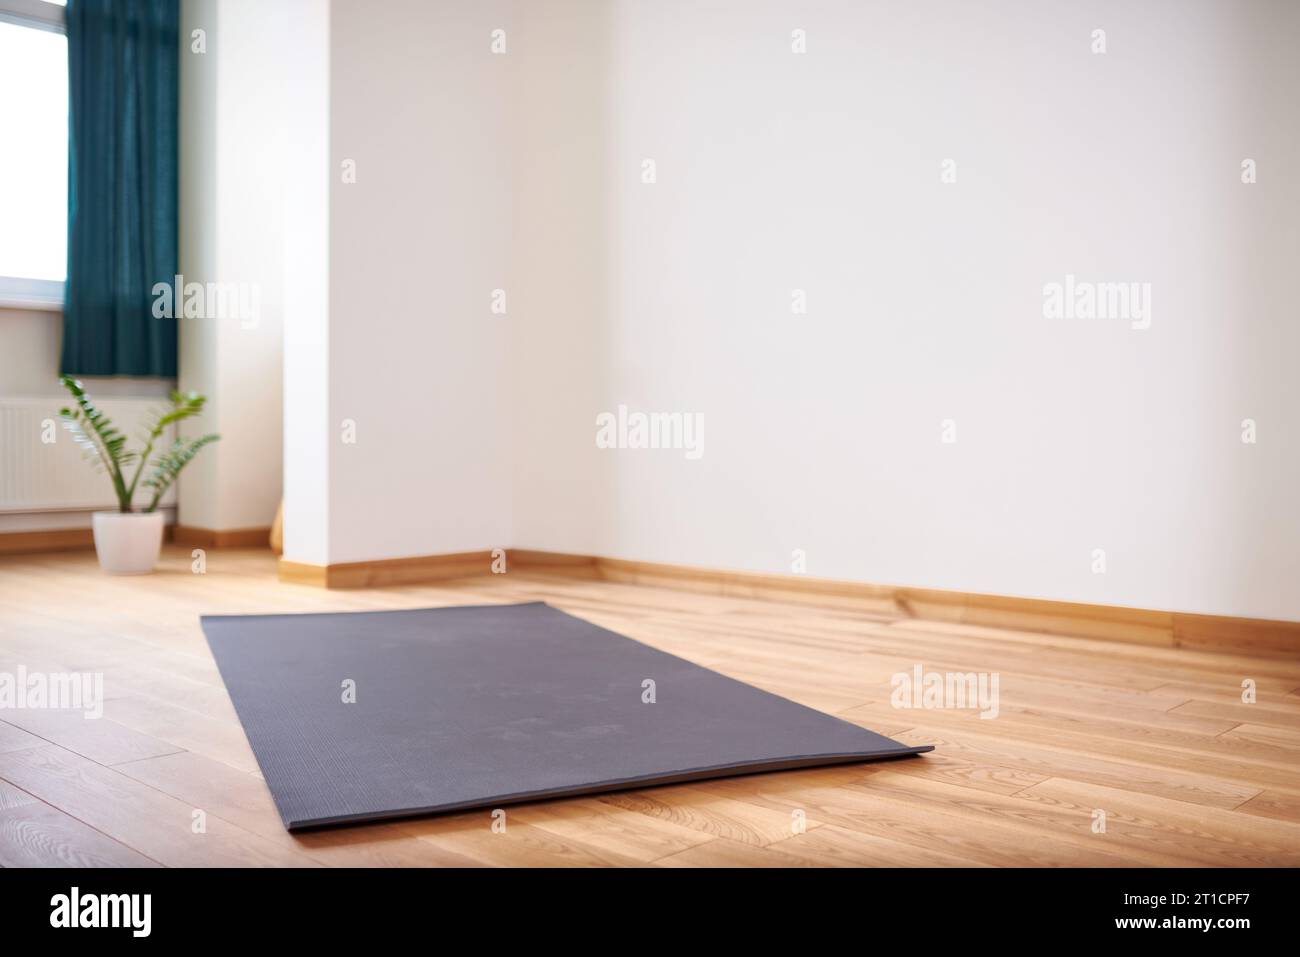 Yoga Blocks, Pillow, Mats, Pads, Accessories Stacked In Empty Yoga Studio  With Wooden Flooring Stock Photo, Picture and Royalty Free Image. Image  59979162.